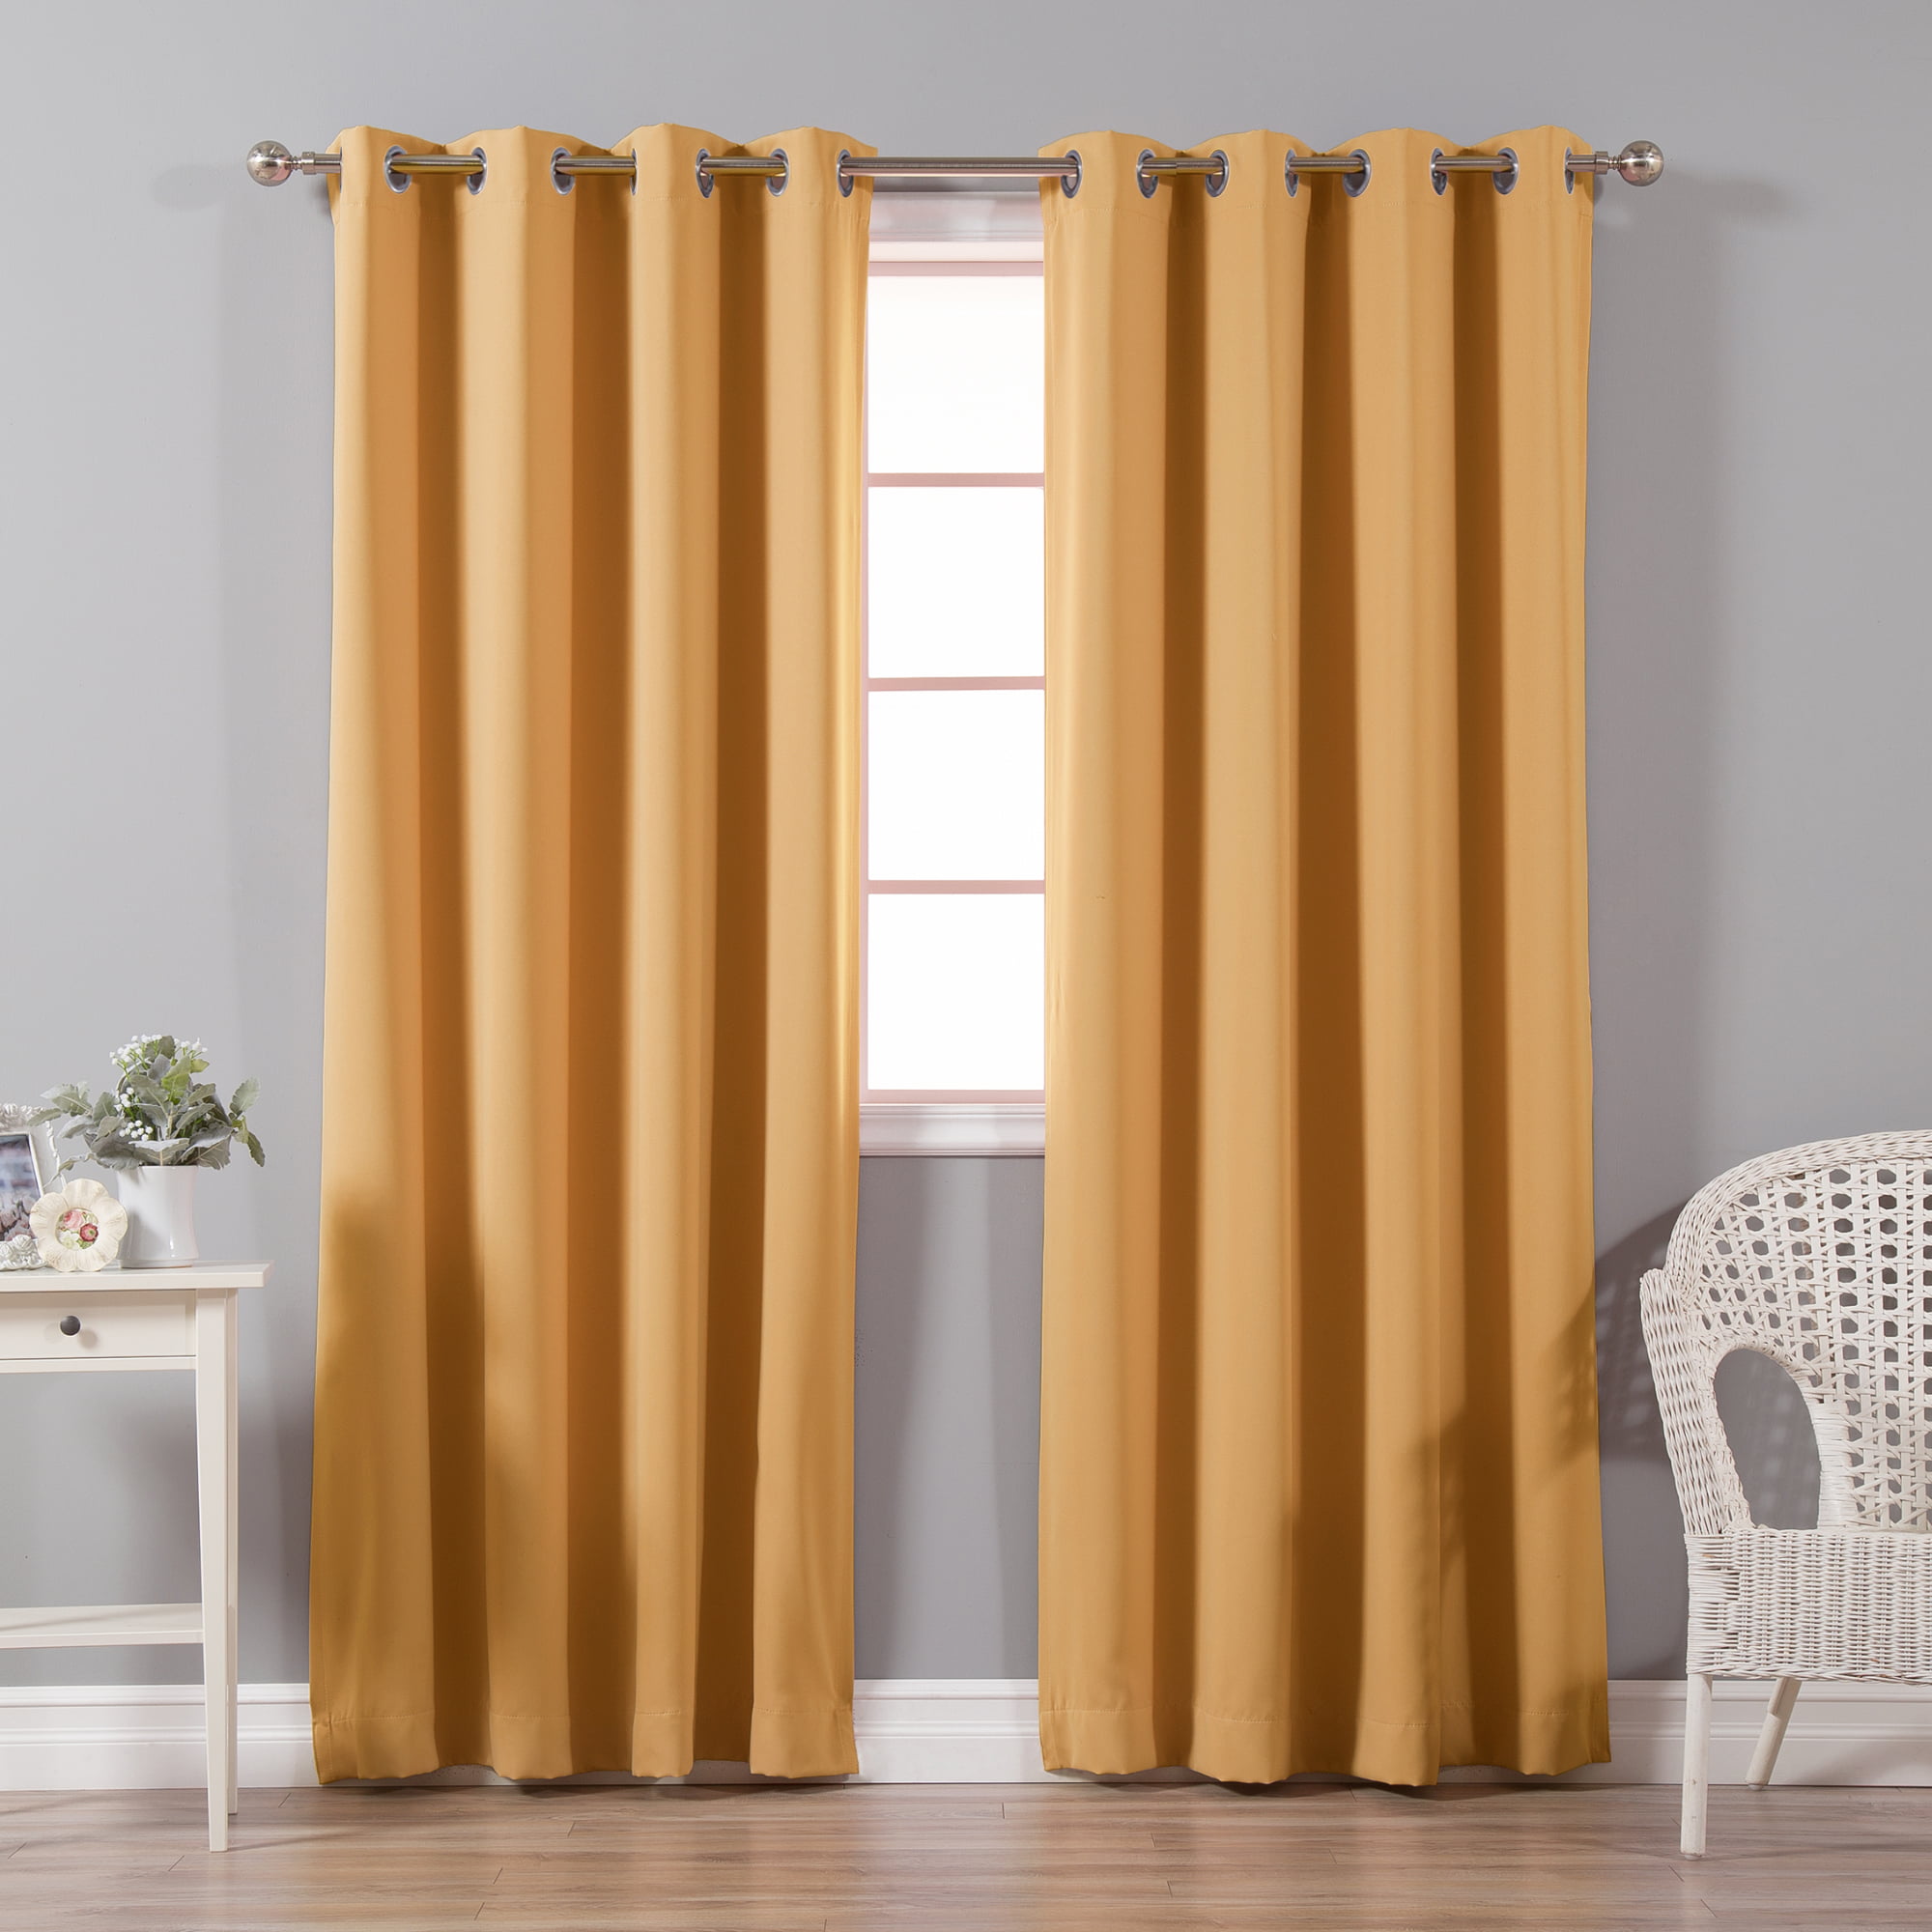 Quality Home Basic Thermal Blackout Curtains - Stainless Steel Nickel